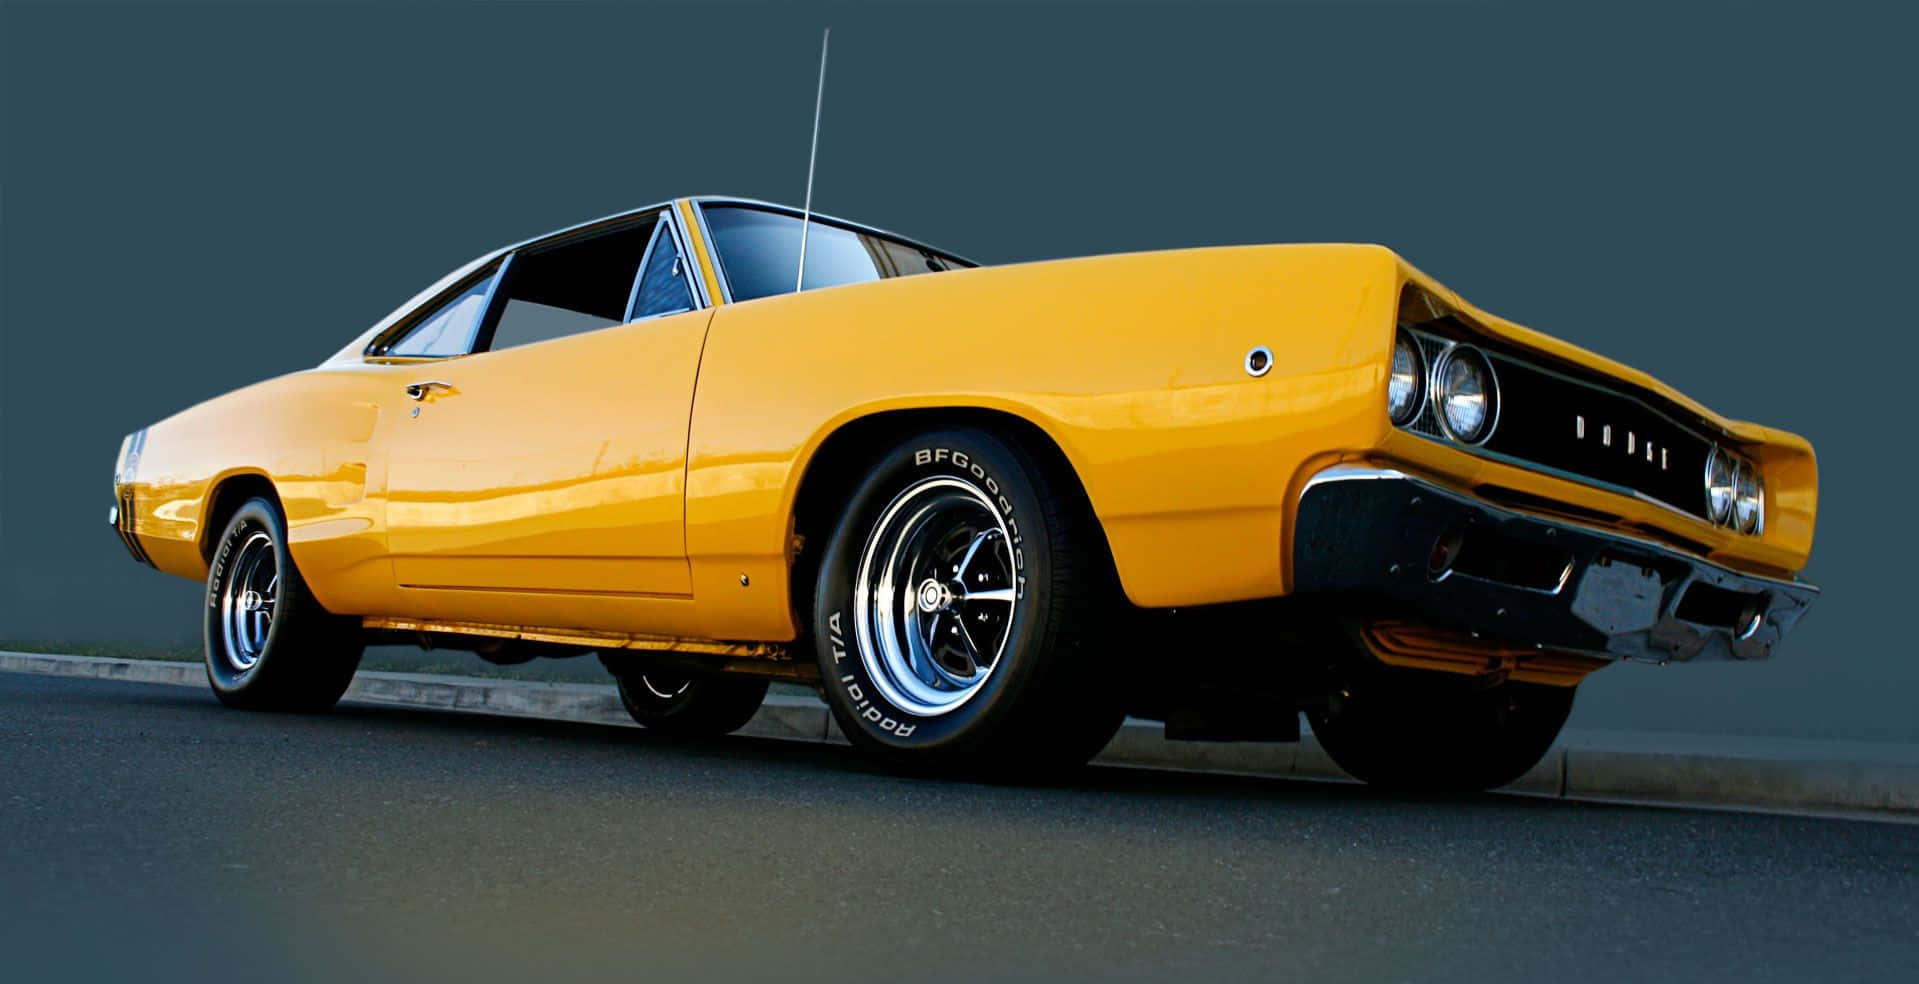 Classic Power Unleashed - The Dodge Super Bee Wallpaper